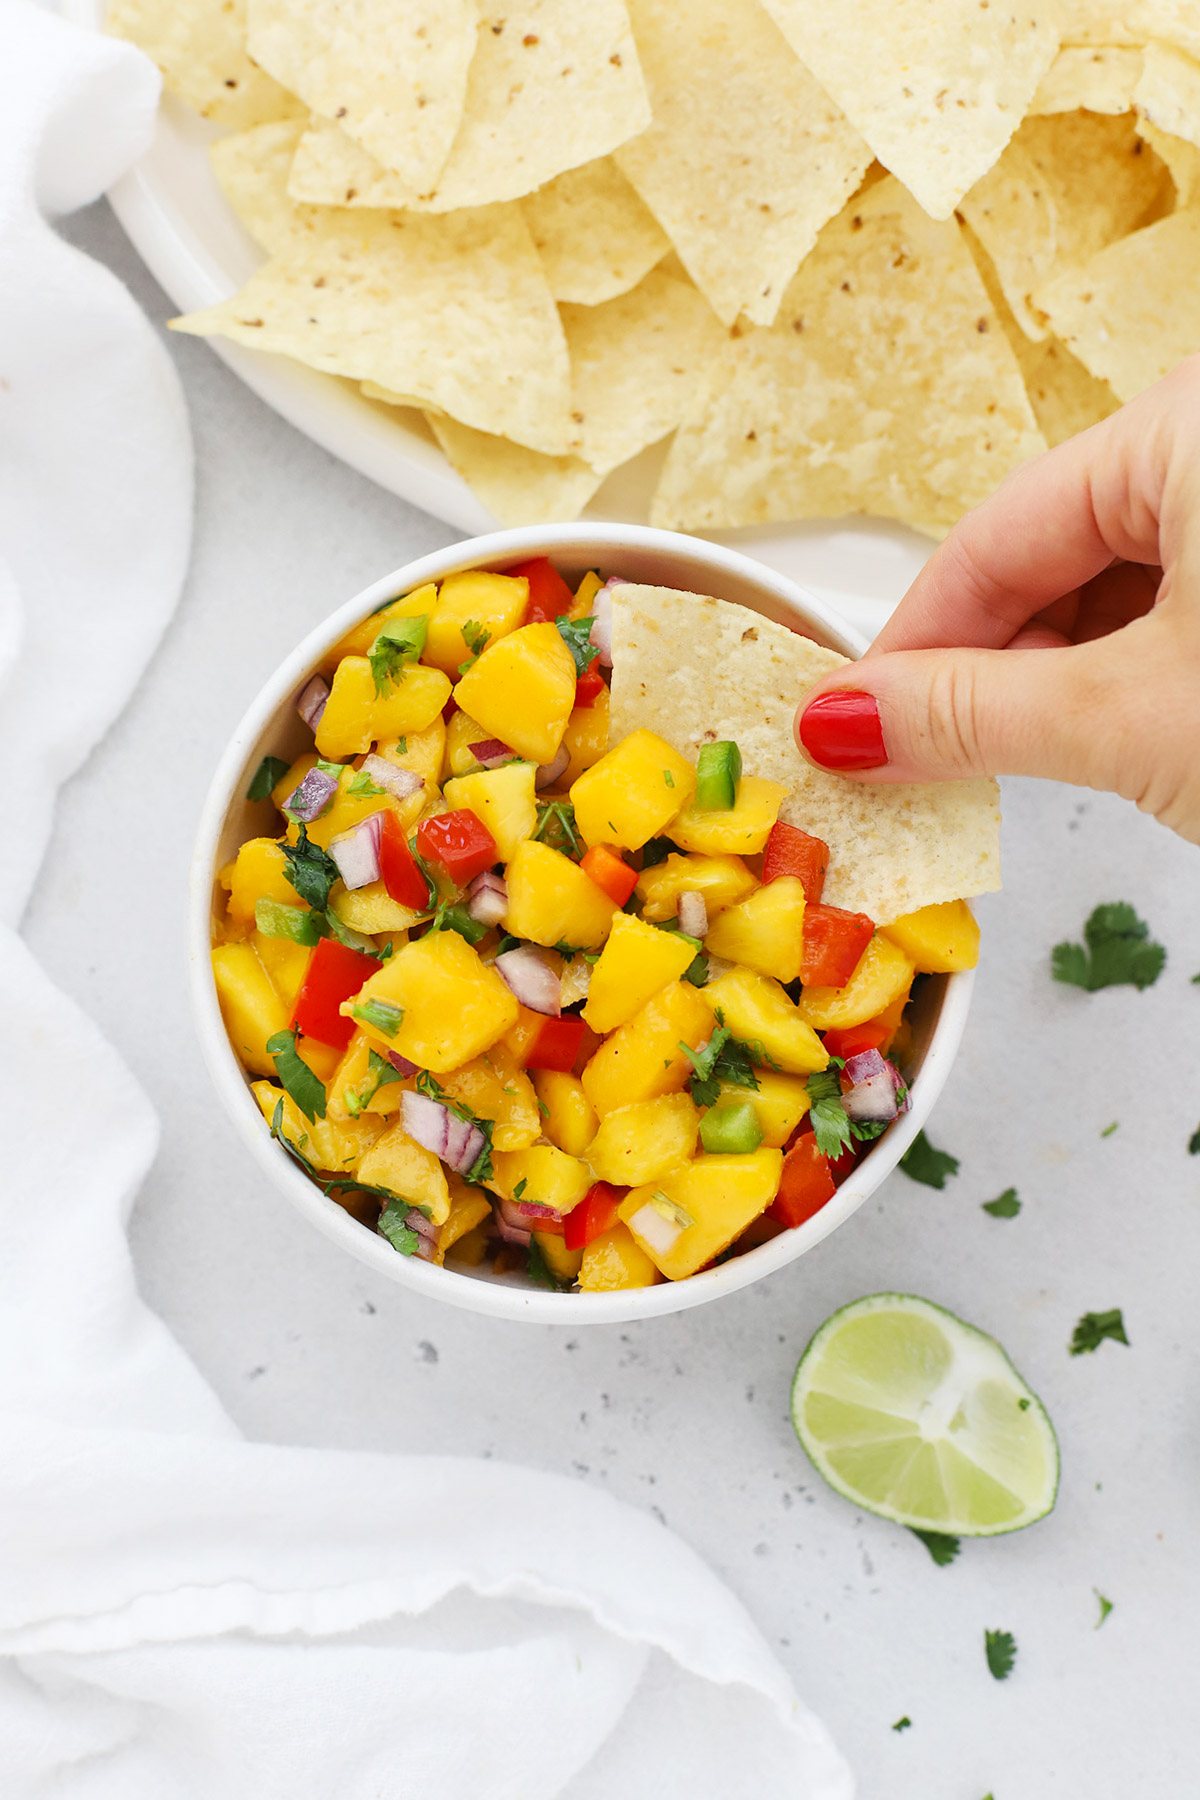 Dipping a chip into a bowl of peach salsa